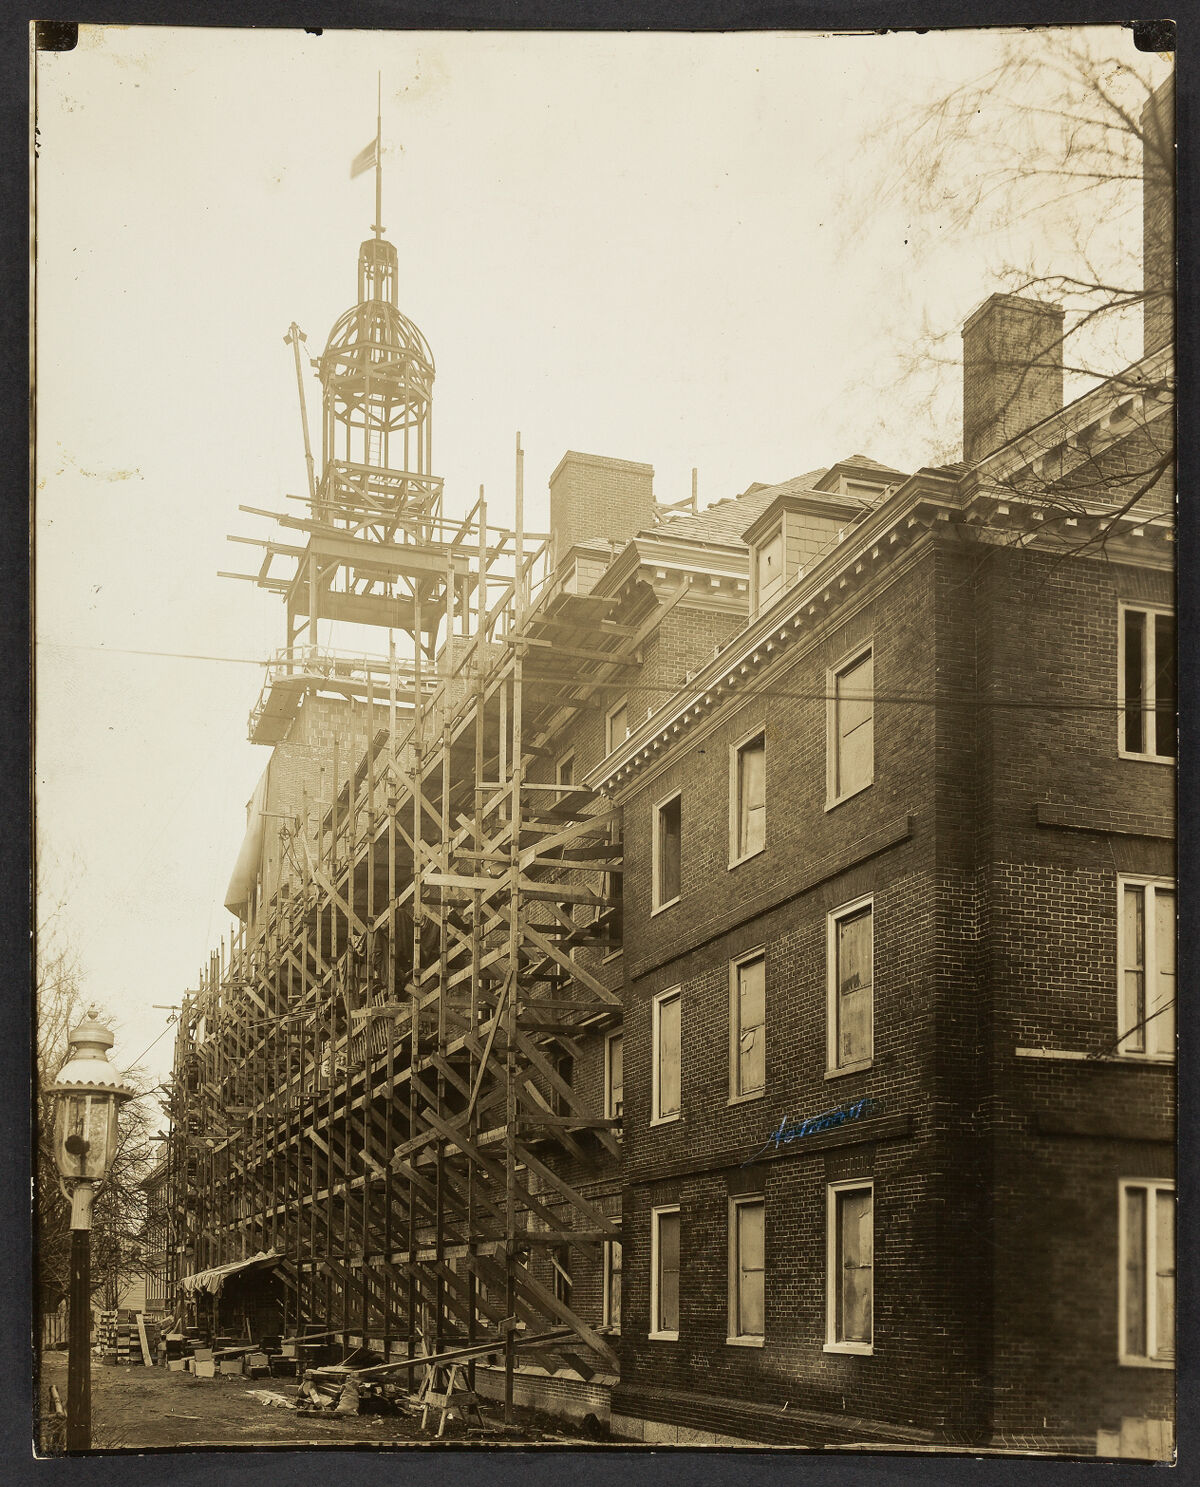 Lowell House under construction.